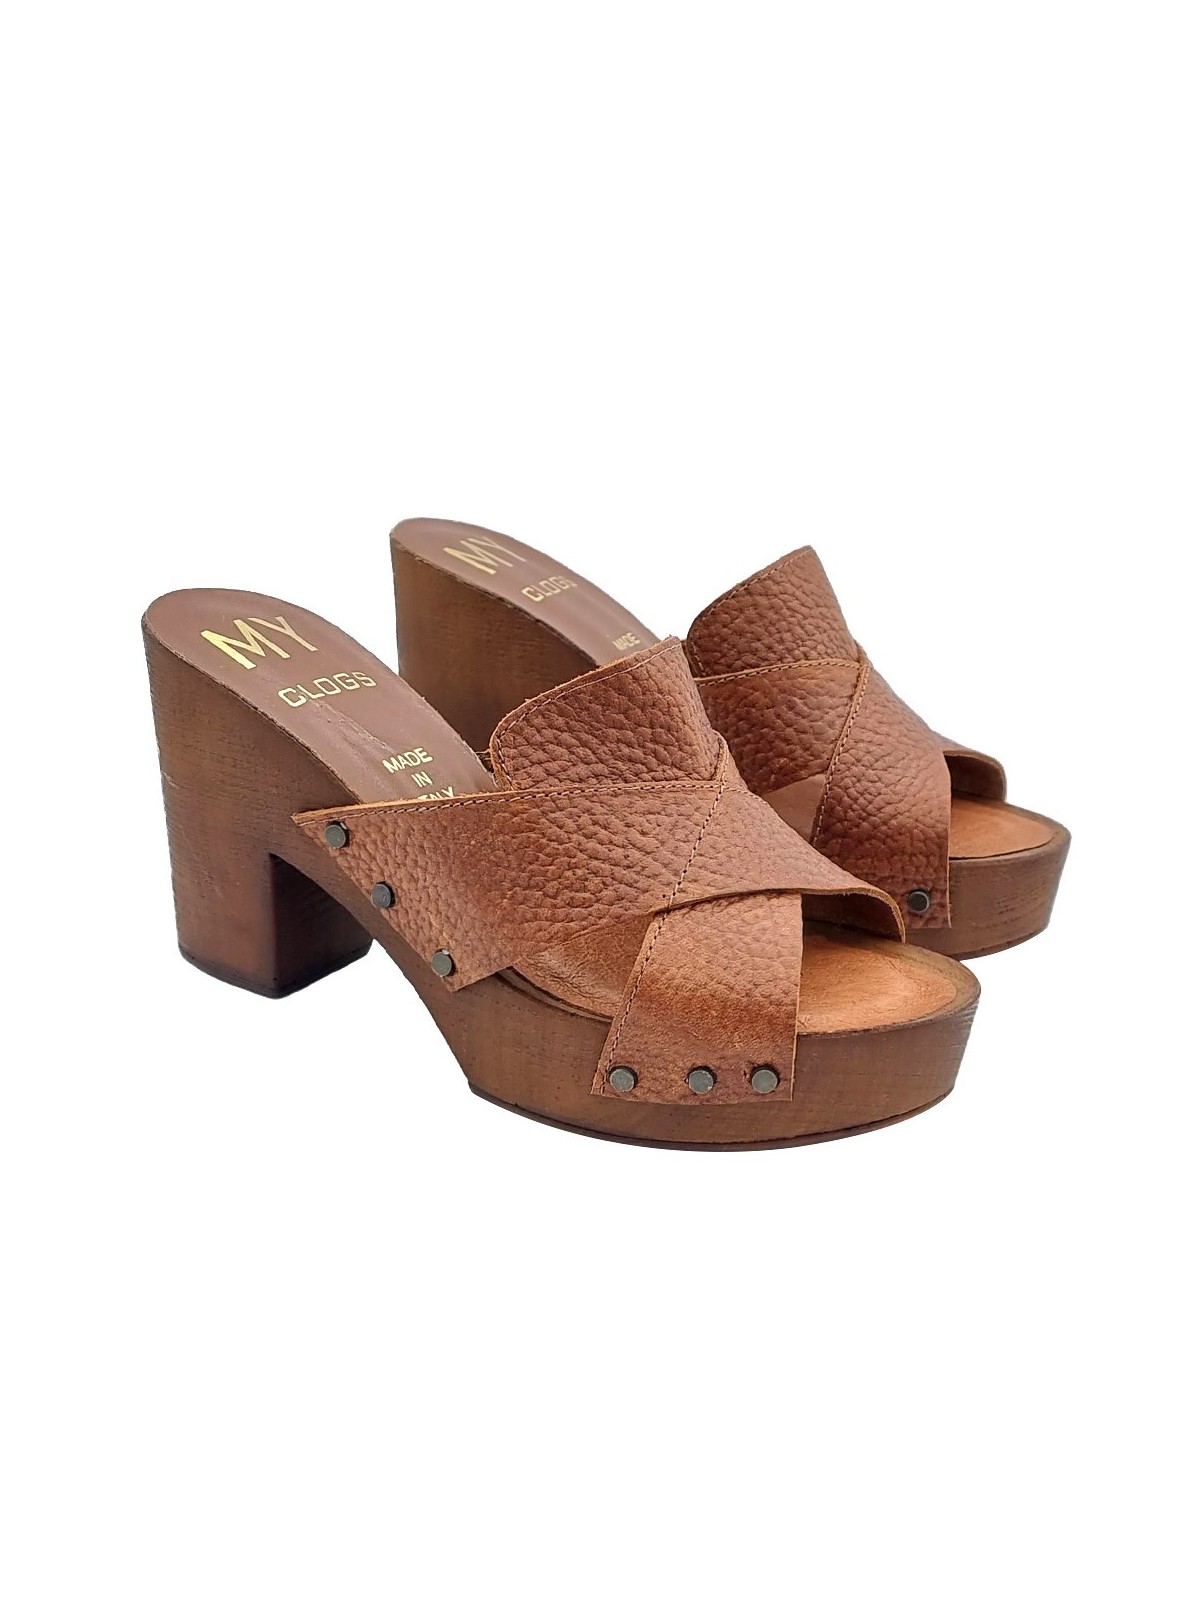 BROWN CLOGS WITH CROSSED BANDS IN TUMBLED LEATHER